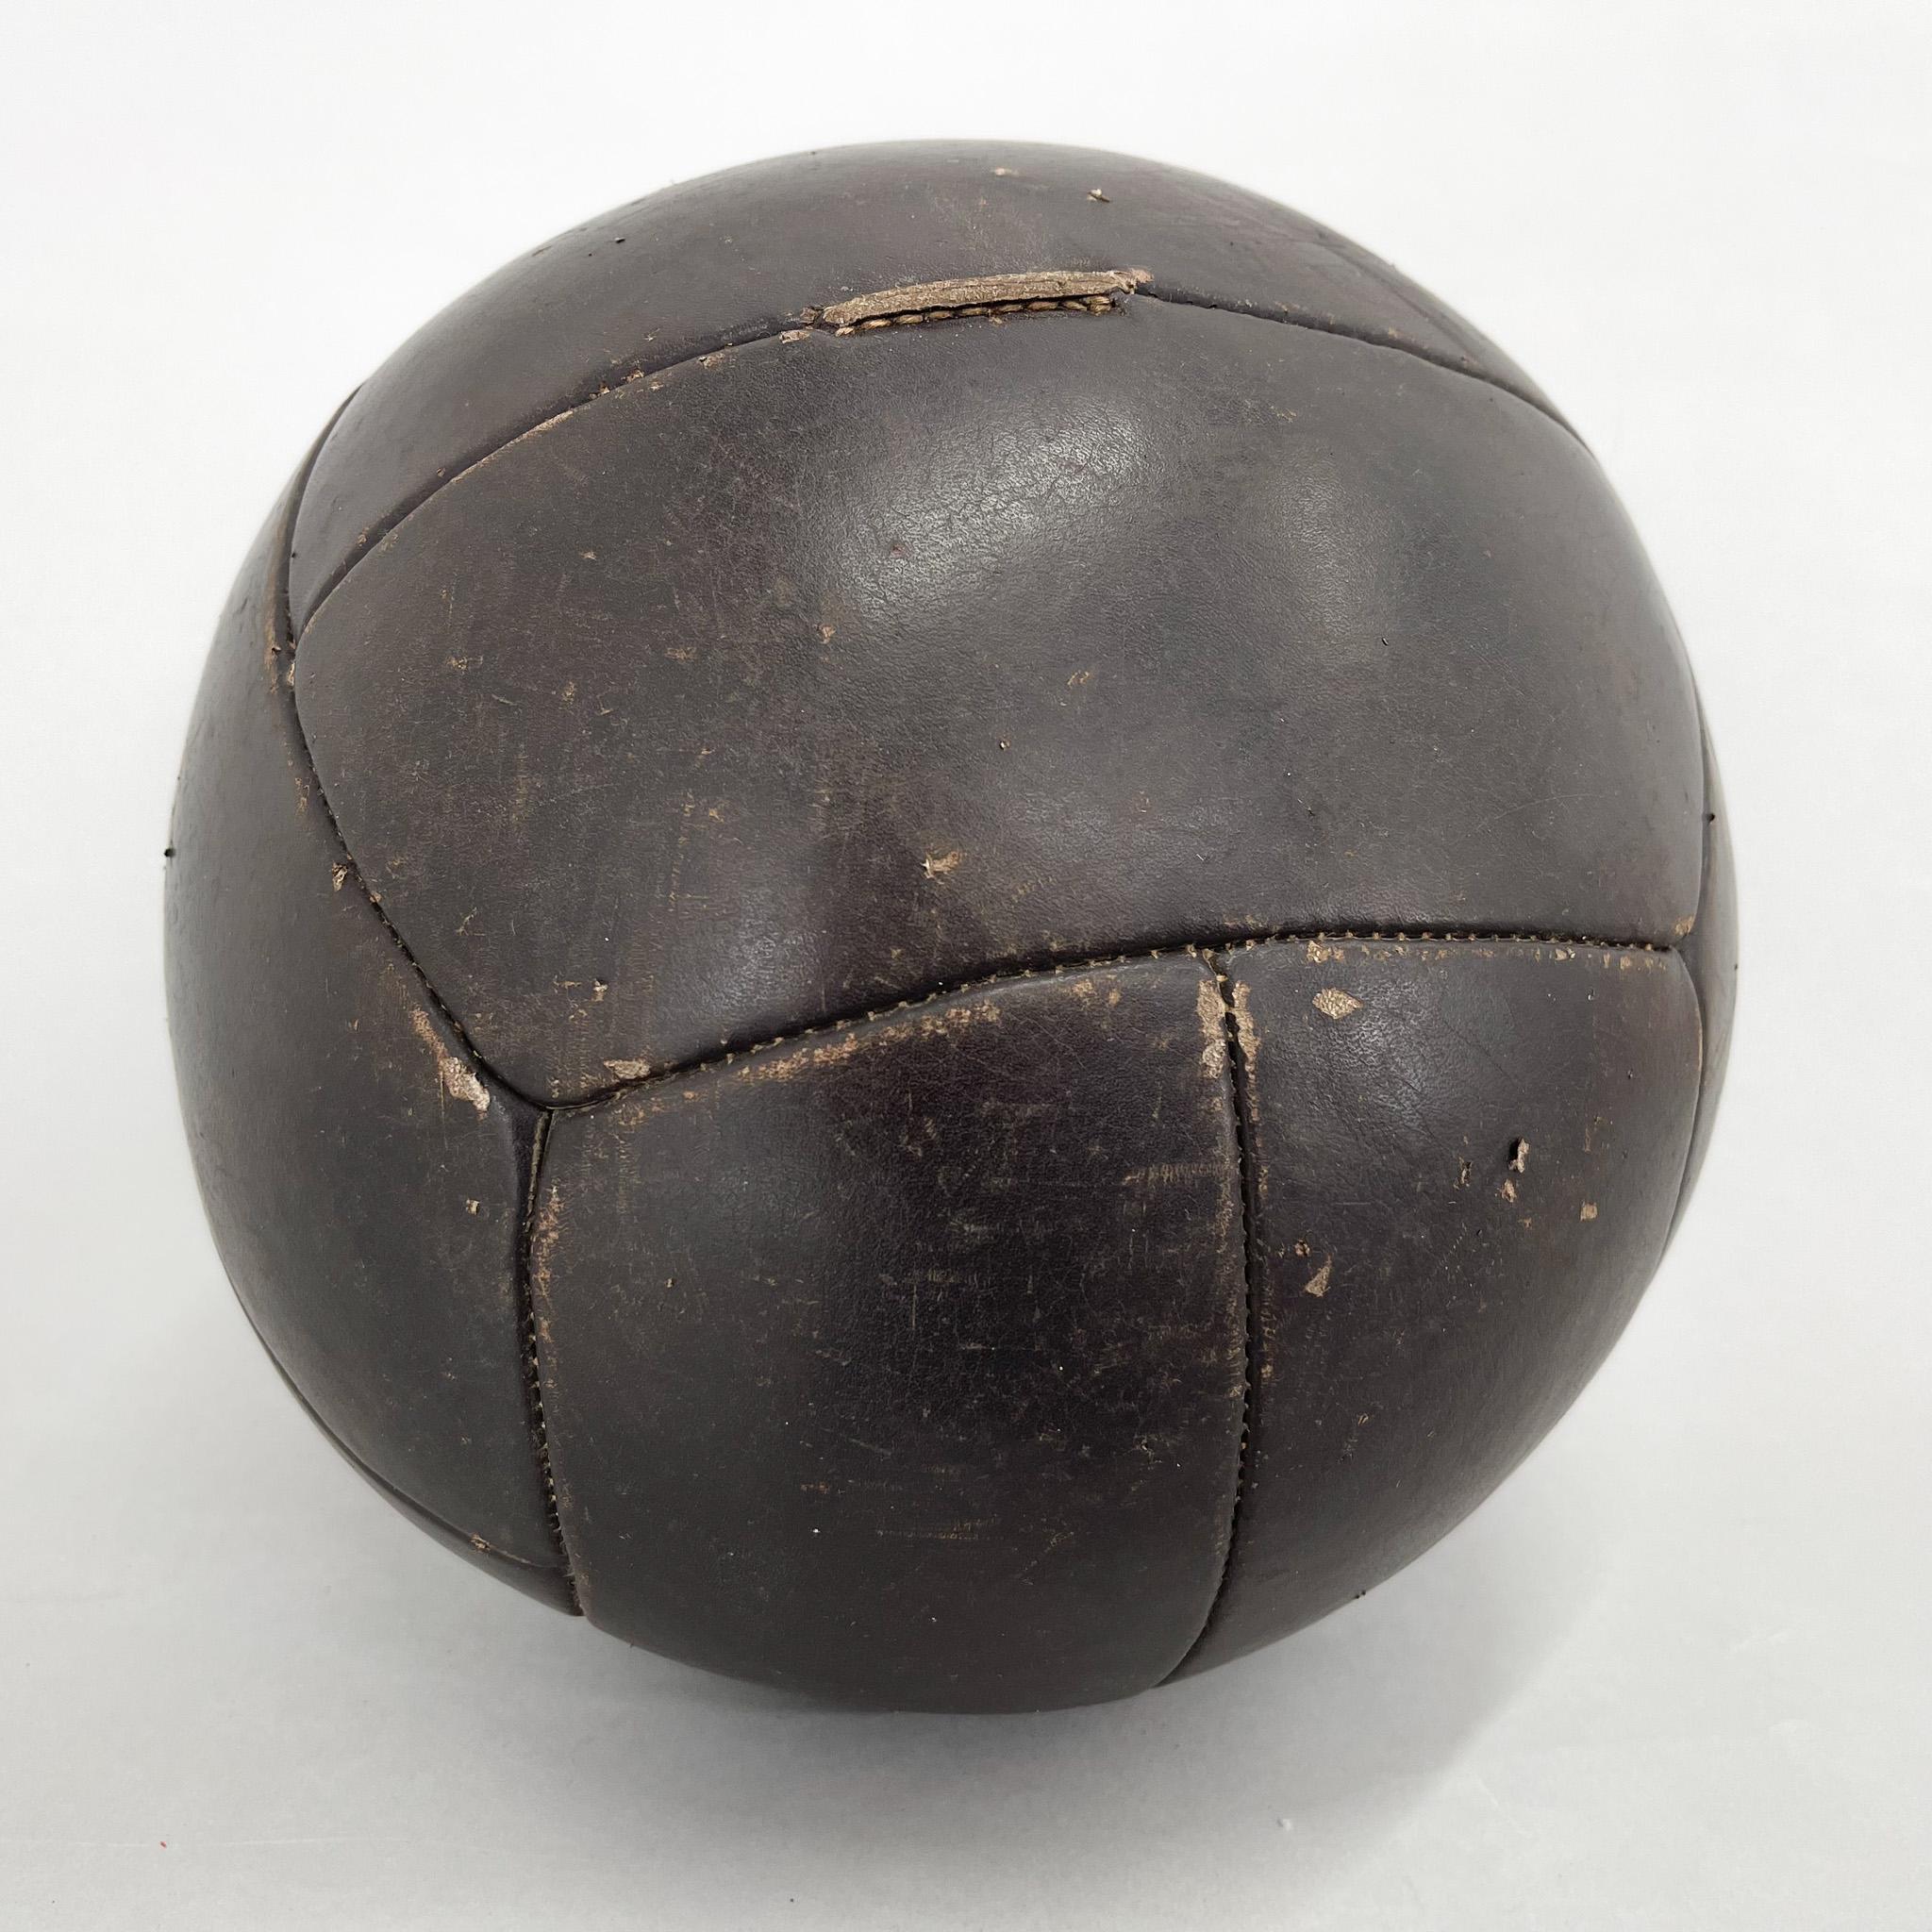 Original vintage heavy leather training ball with beautiful patina. The ball is made of handstitched genuine leather in former Czechoslovakia in the 1930s. It can be used as an original interior accessory or as a stylish training aid. The leather